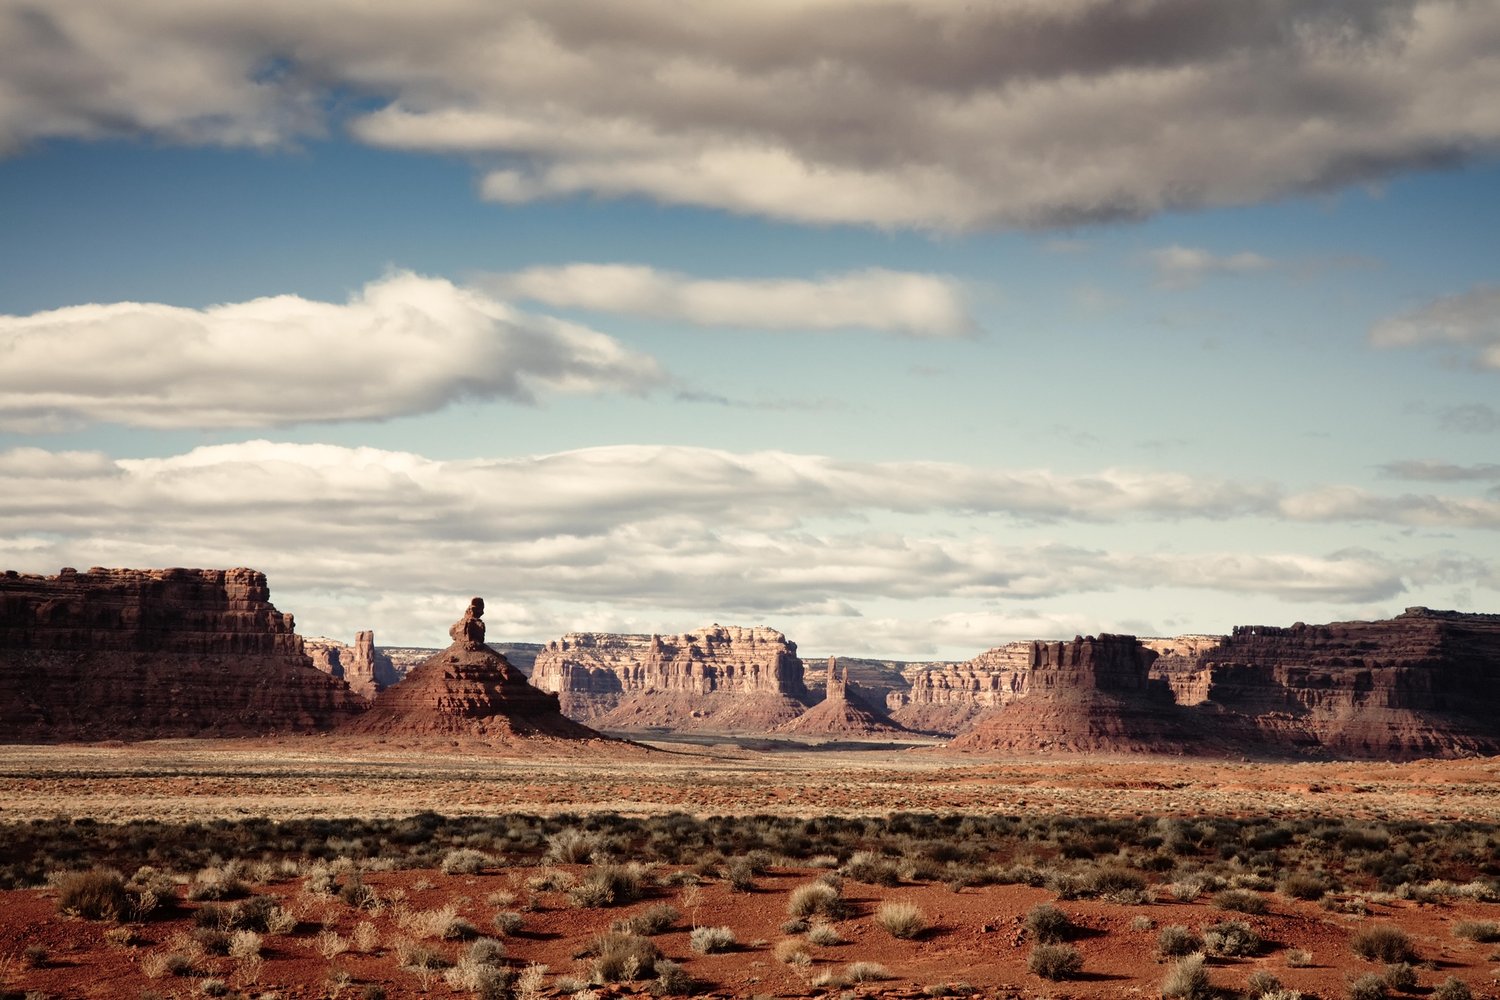 Image of Valley of the Gods